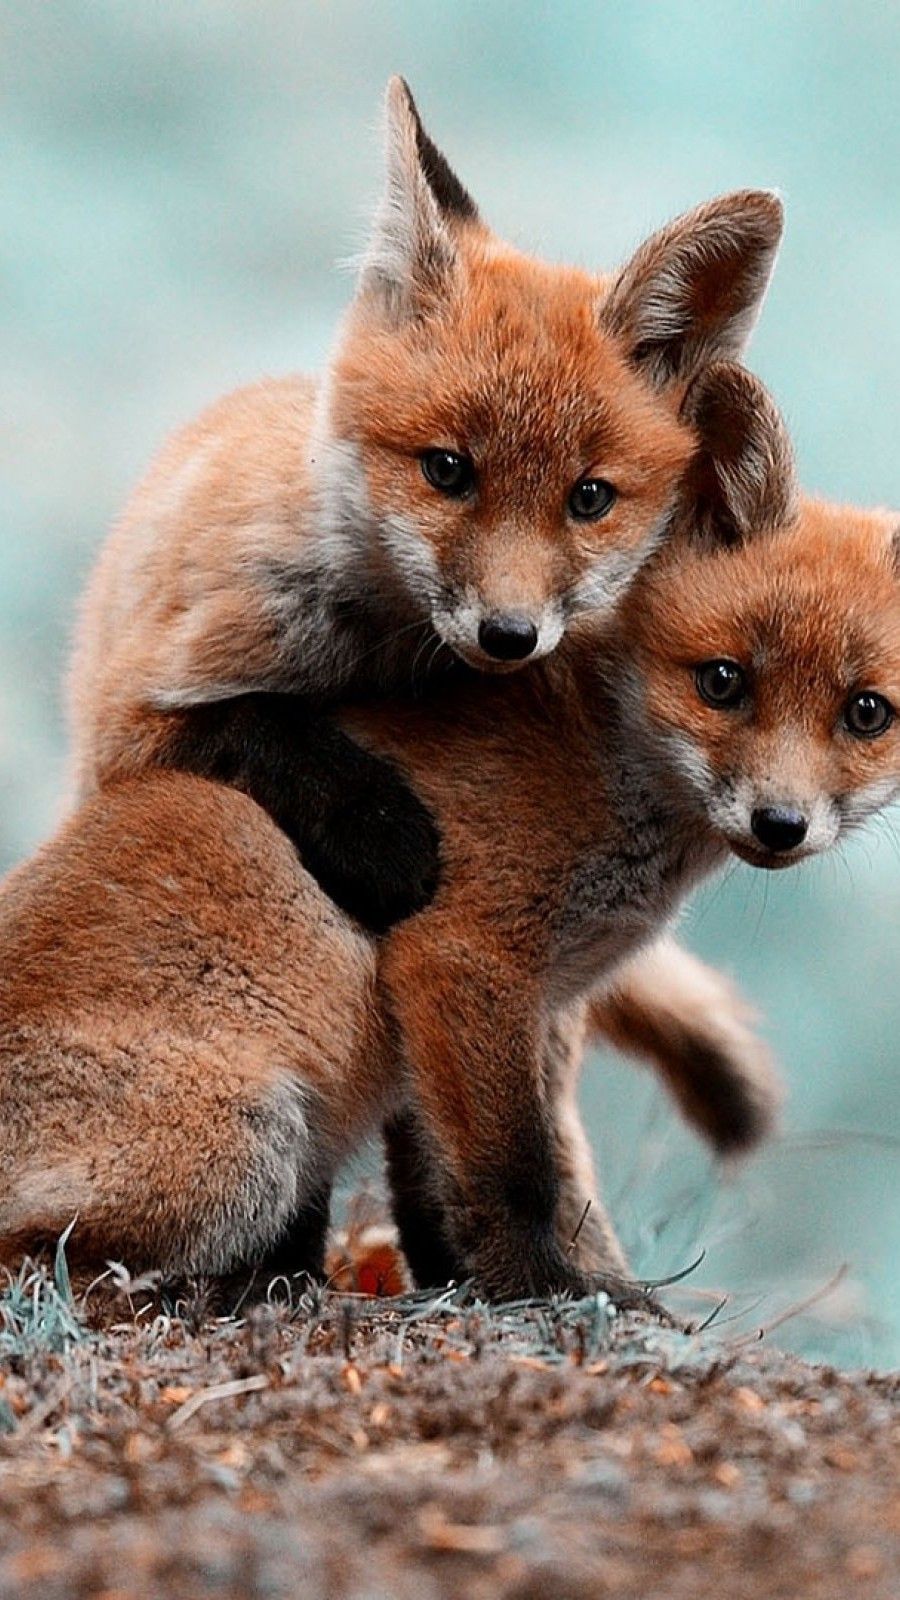 Animals cute baby Foxes mobile wallpaper